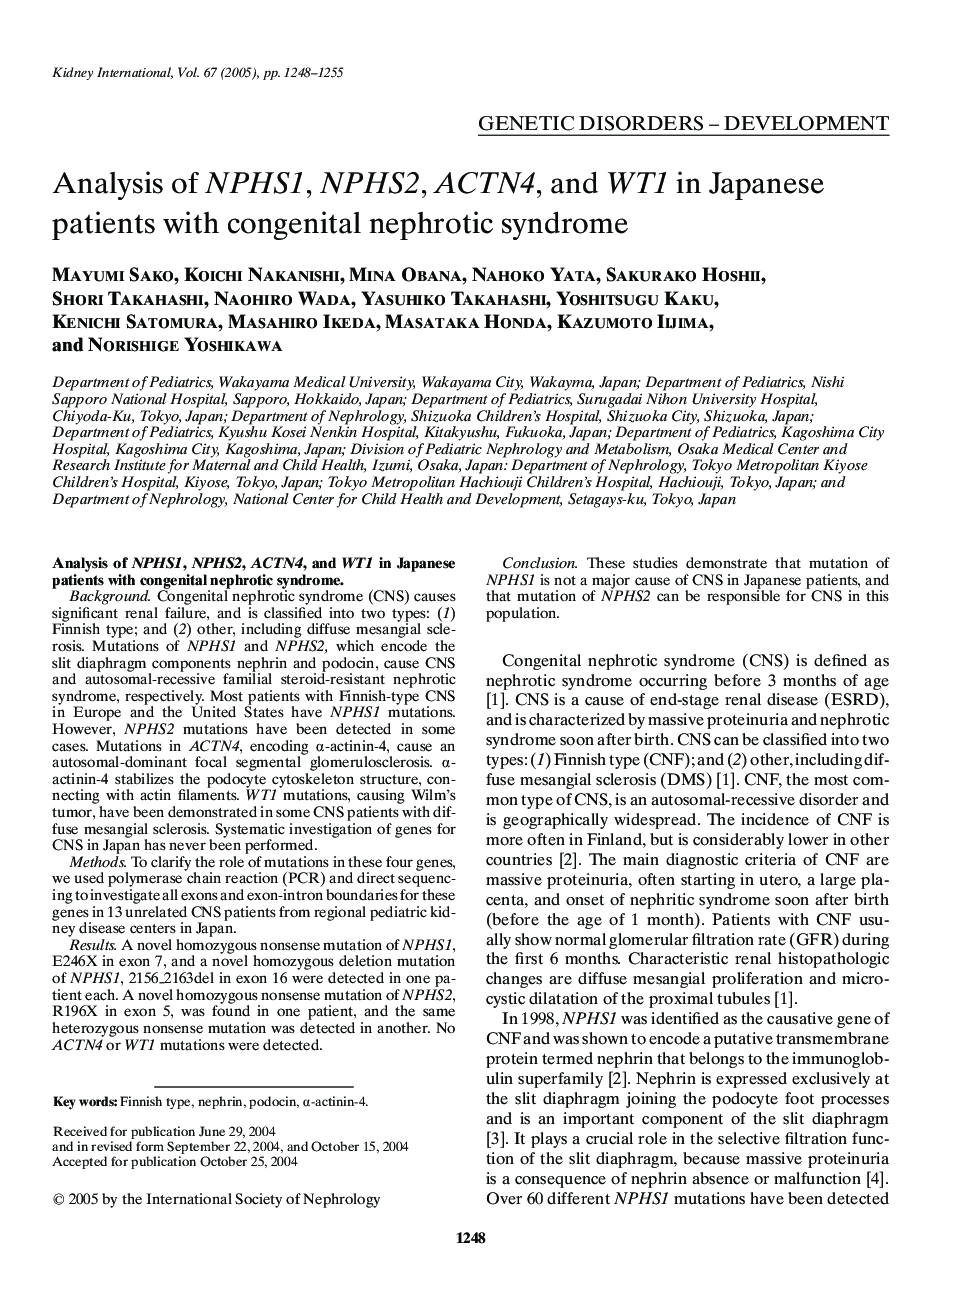 Analysis of NPHS1, NPHS2, ACTN4, and WT1 in Japanese patients with congenital nephrotic syndrome